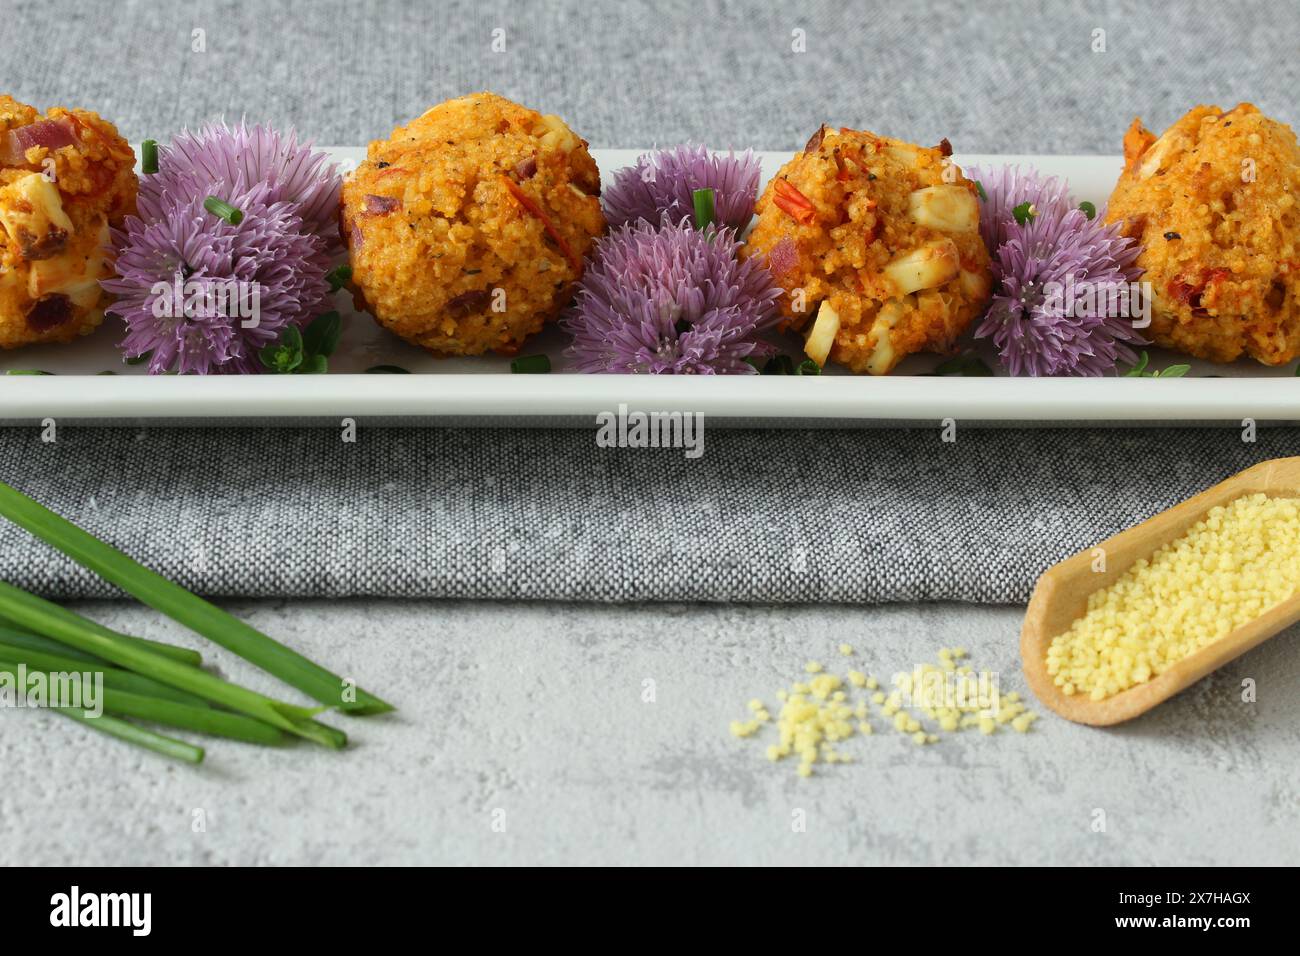 Couscous-Feta Balls with Chive Blossoms on Neutral Grey Background Stock Photo